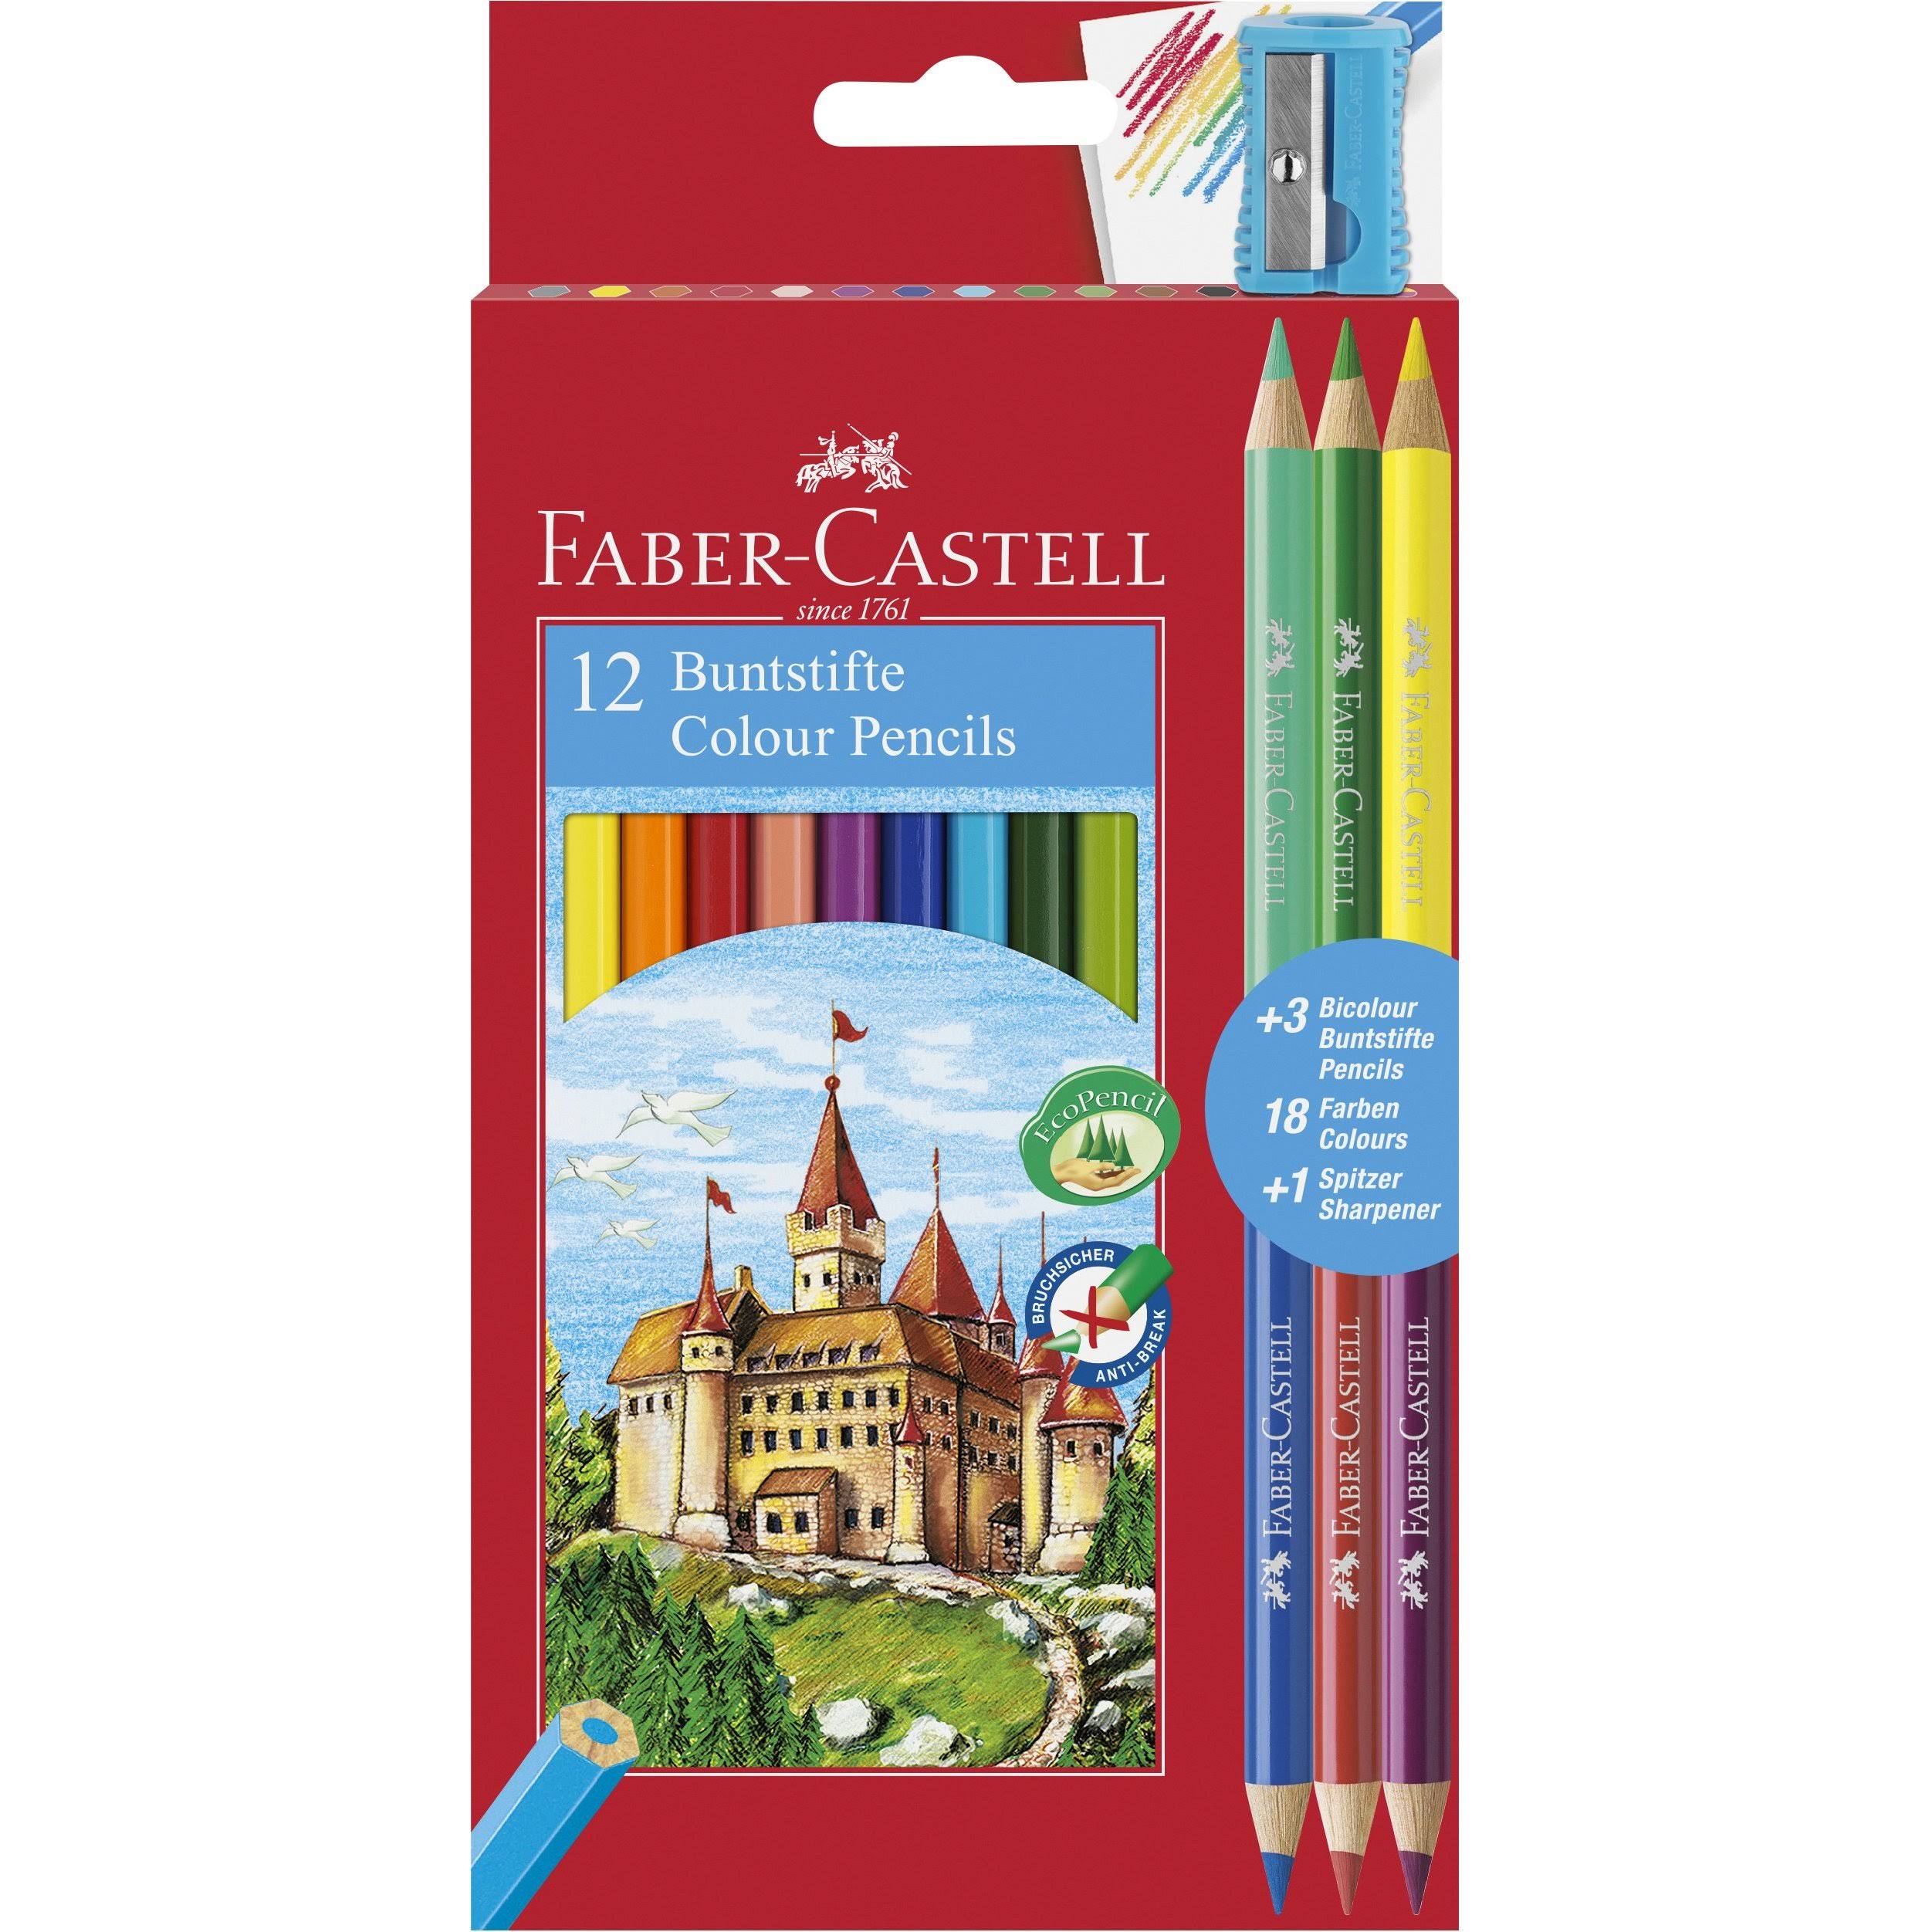 Faber-Castell Colouring Pencils with 3 Bi-Colour Pencil + Sharpener - Pack of 12